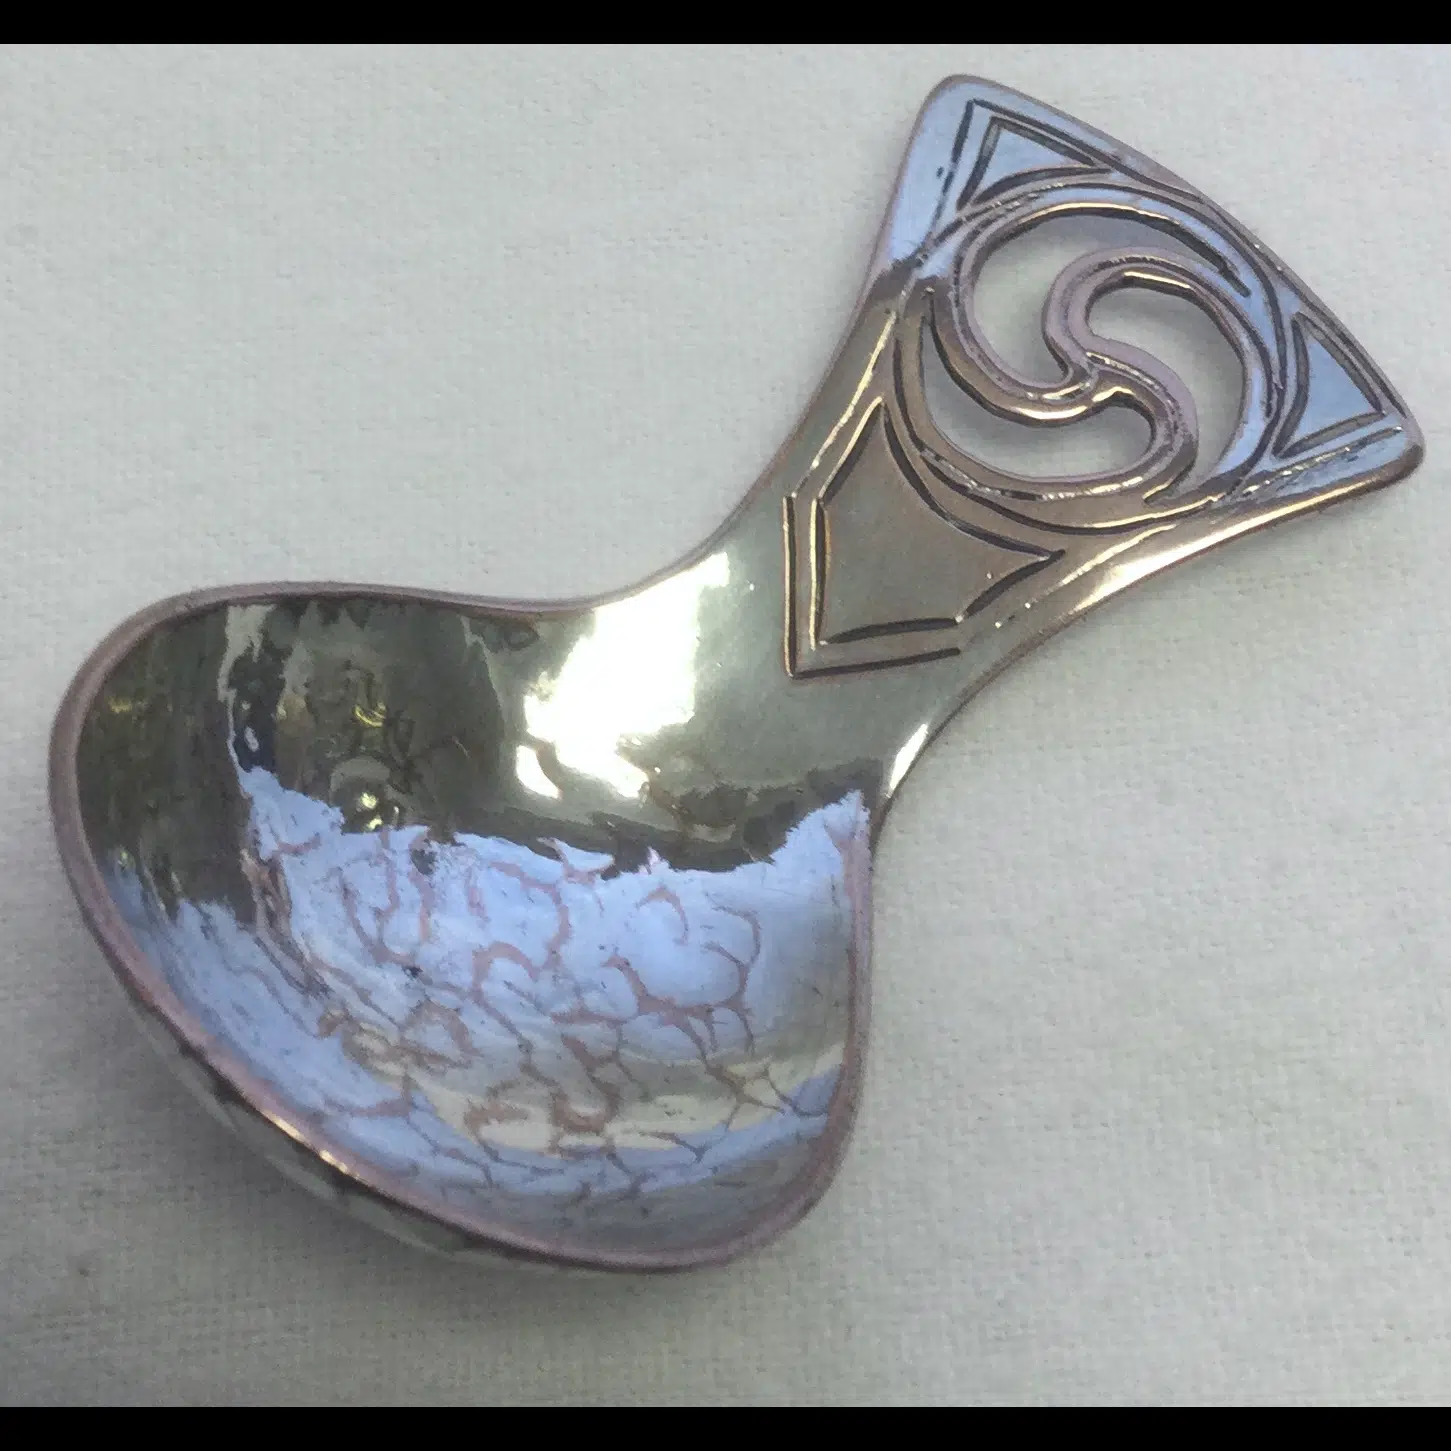 morecambe hec silver plated and pierced caddy spoon